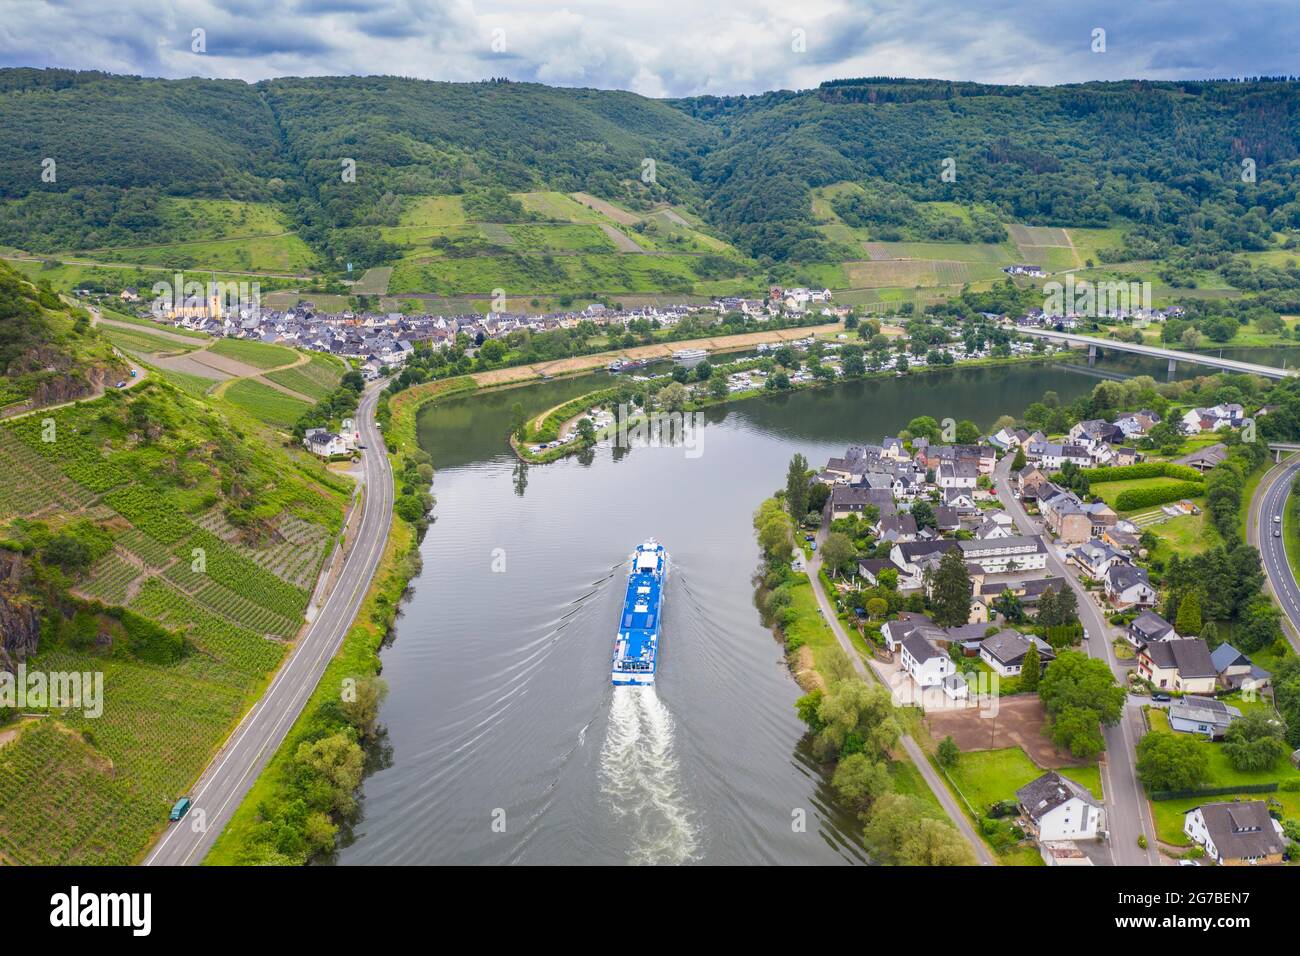 River cruise ship on the Moselle, Moselle valley, Germany Stock Photo